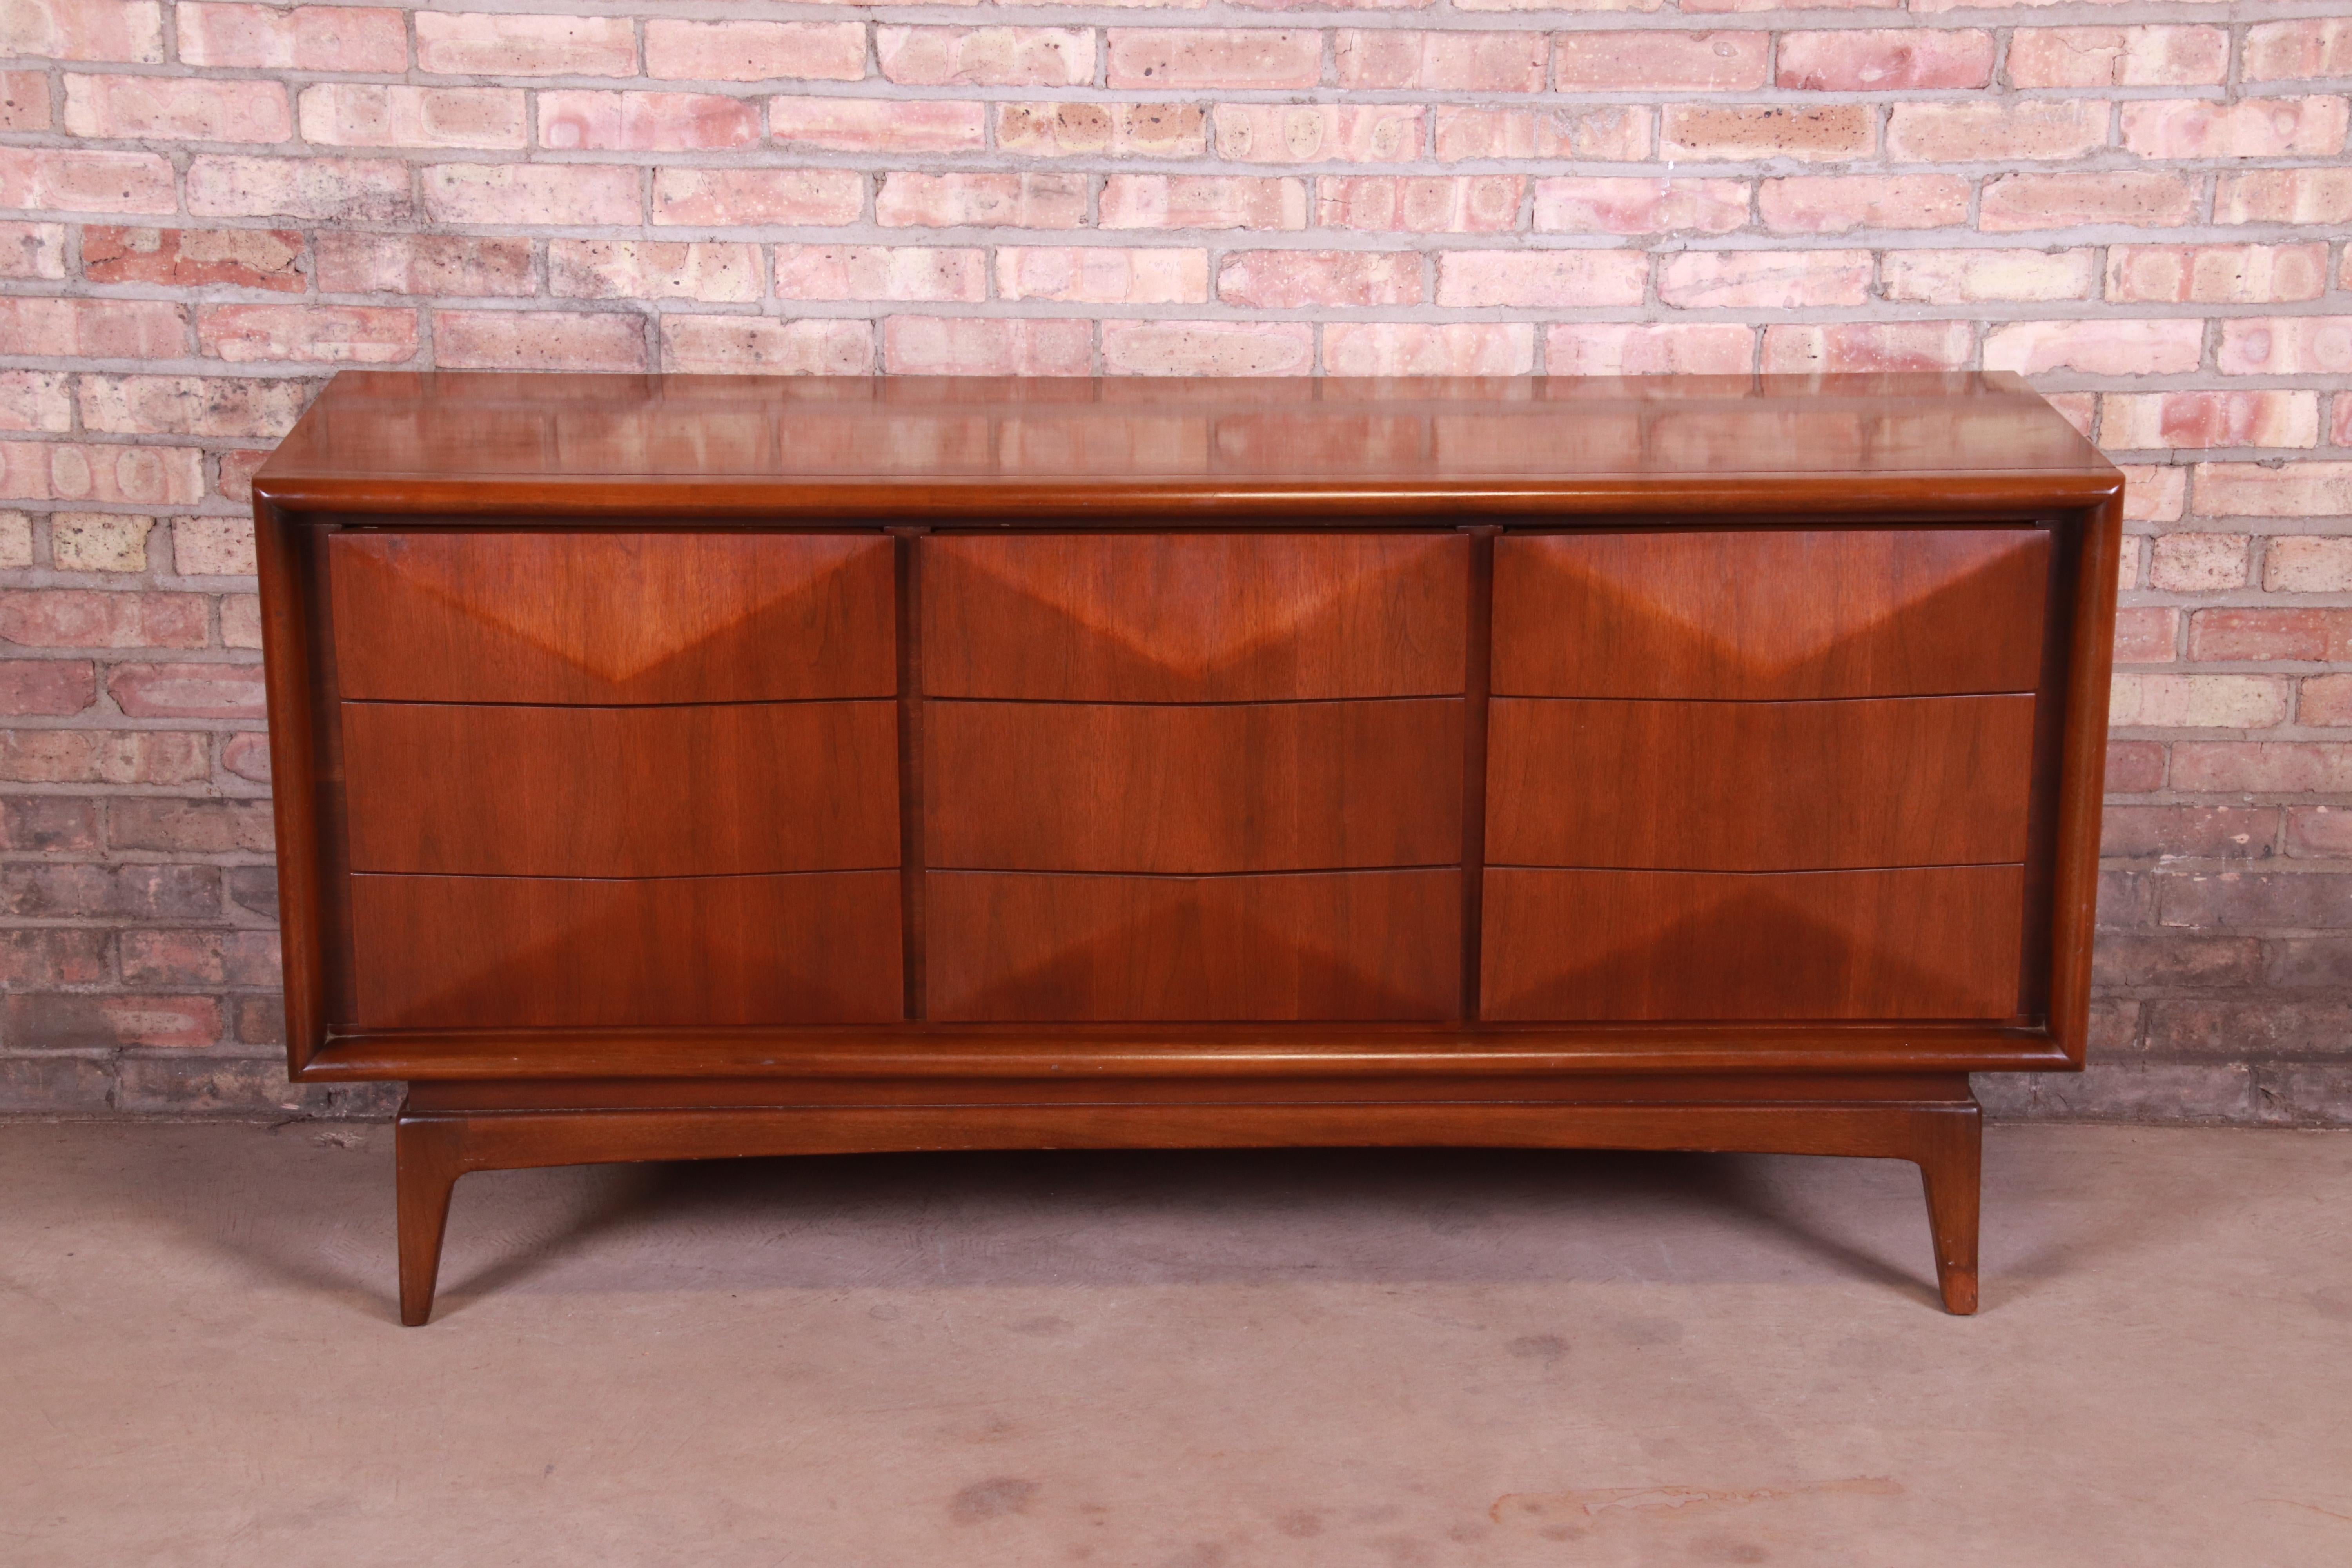 American Mid-Century Modern Sculpted Walnut Diamond Front Dresser or Credenza by United